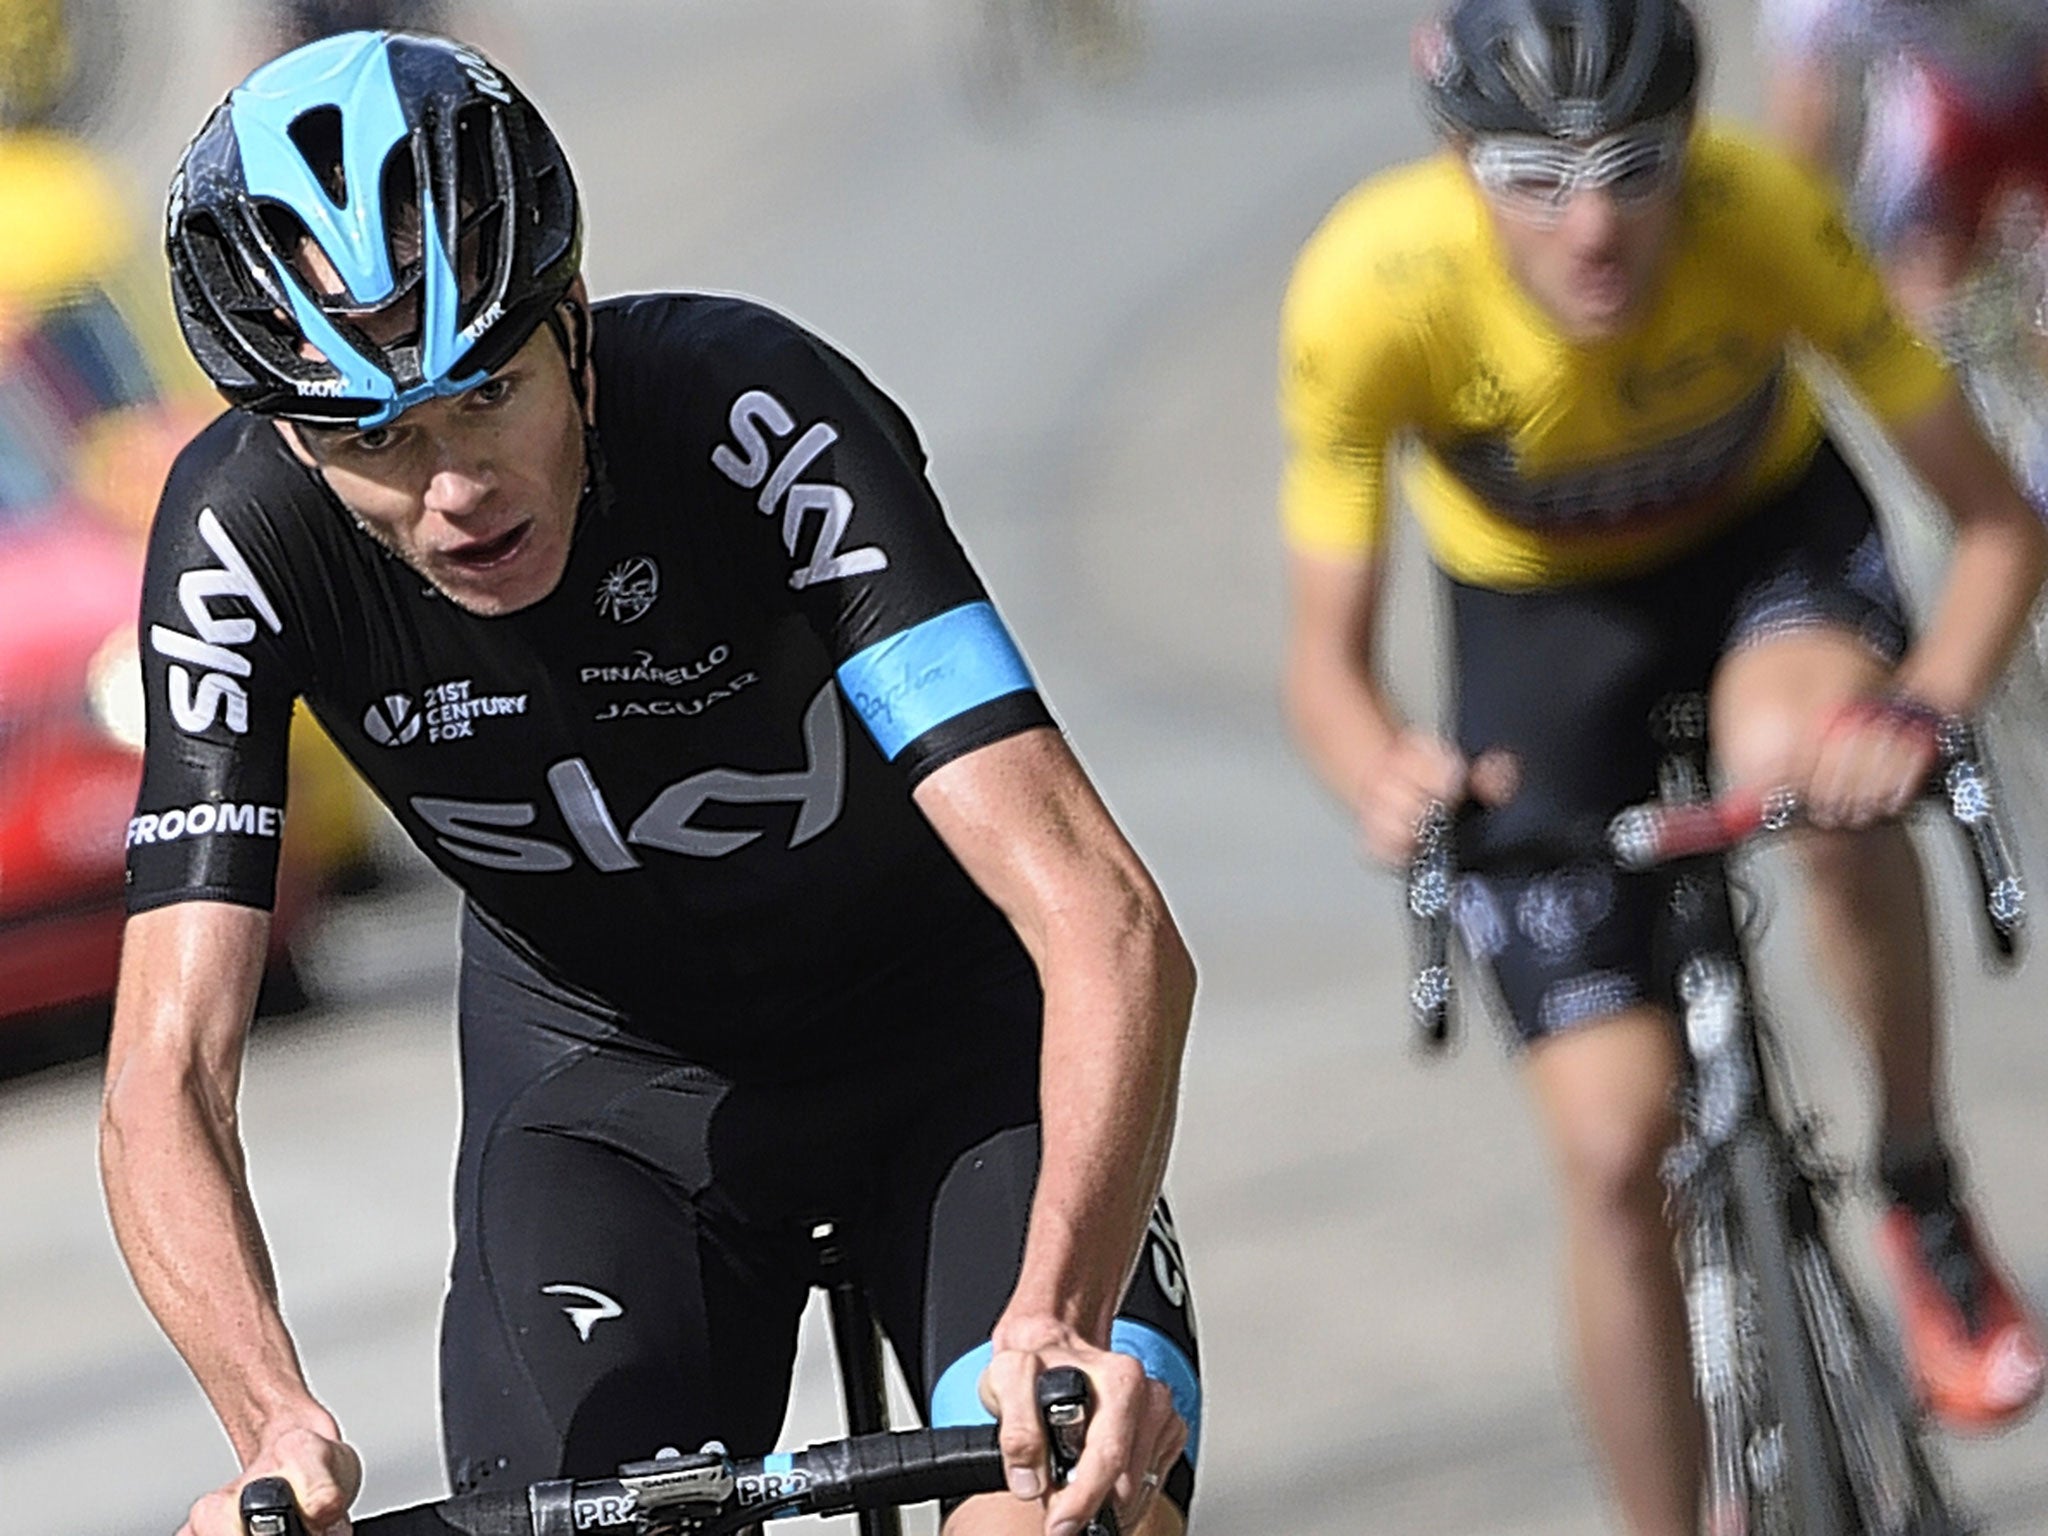 Chris Froome climbs the last hill of yesterday’s final stage of the Critérium du Dauphiné ahead of the yellow jersey of Tejay van Garderen